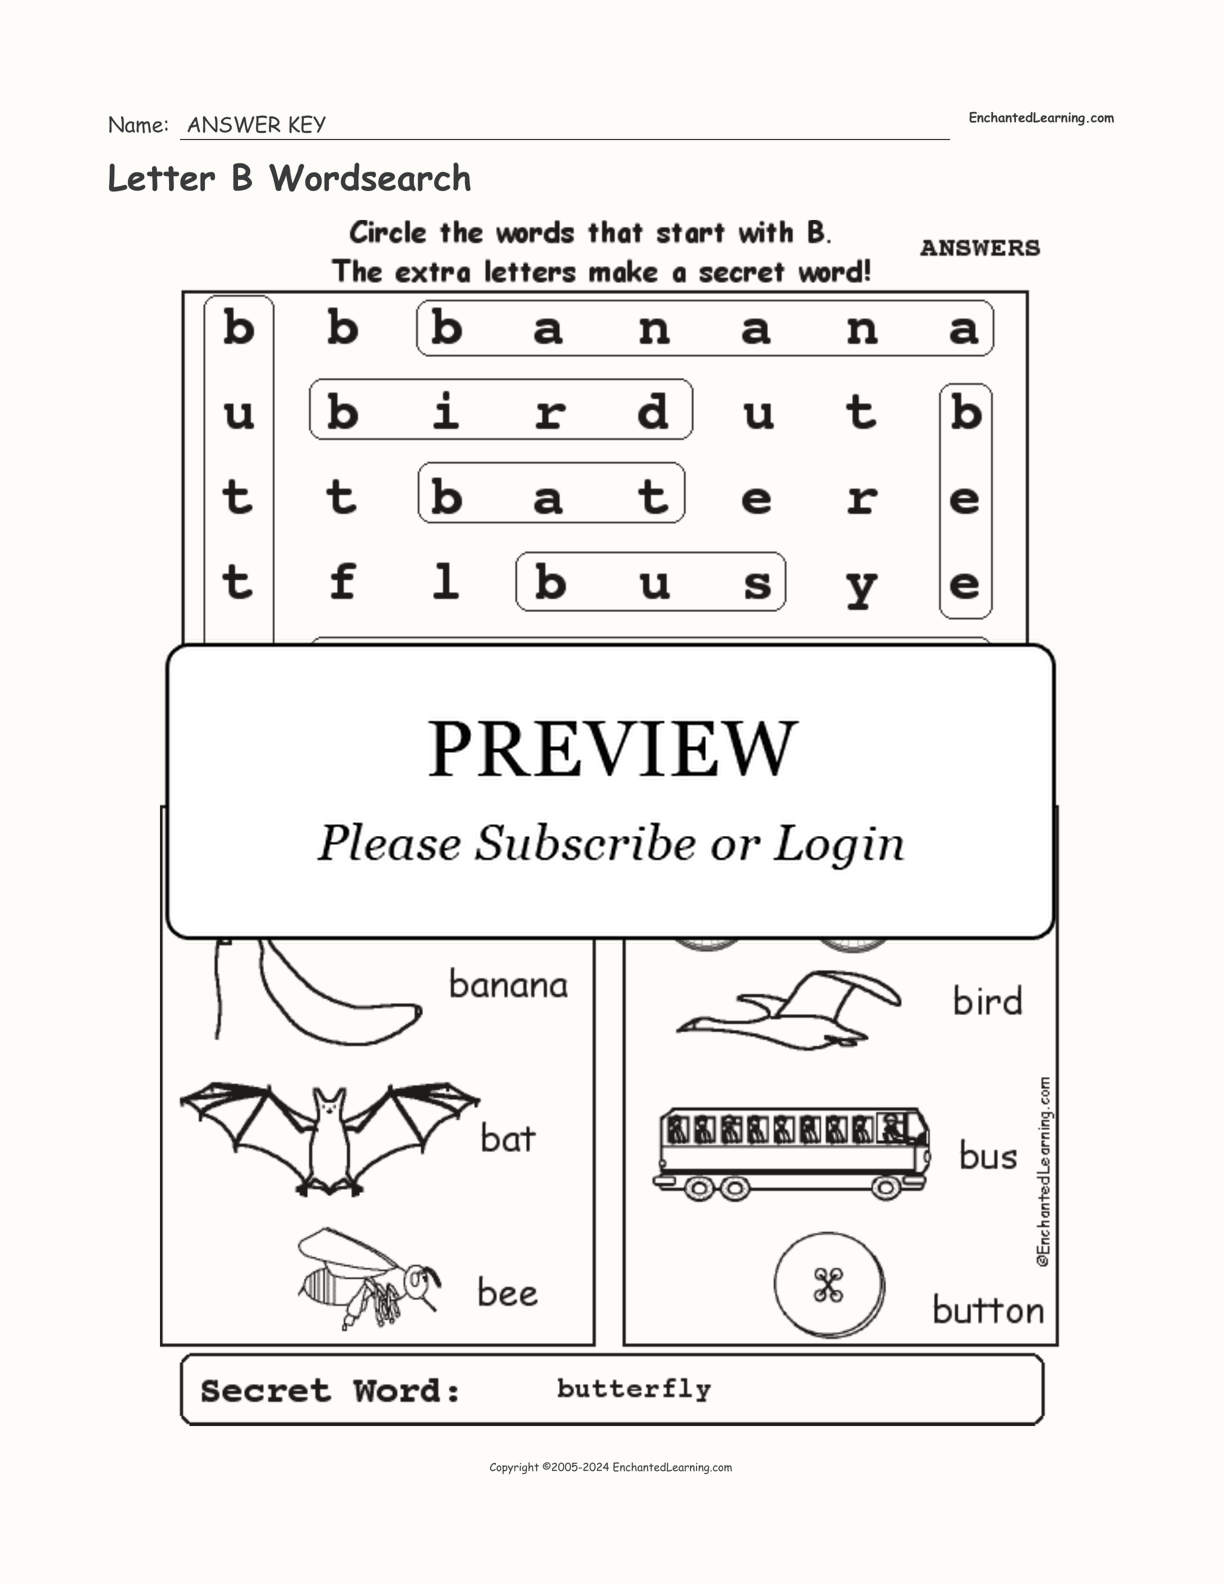 Letter B Wordsearch interactive worksheet page 2